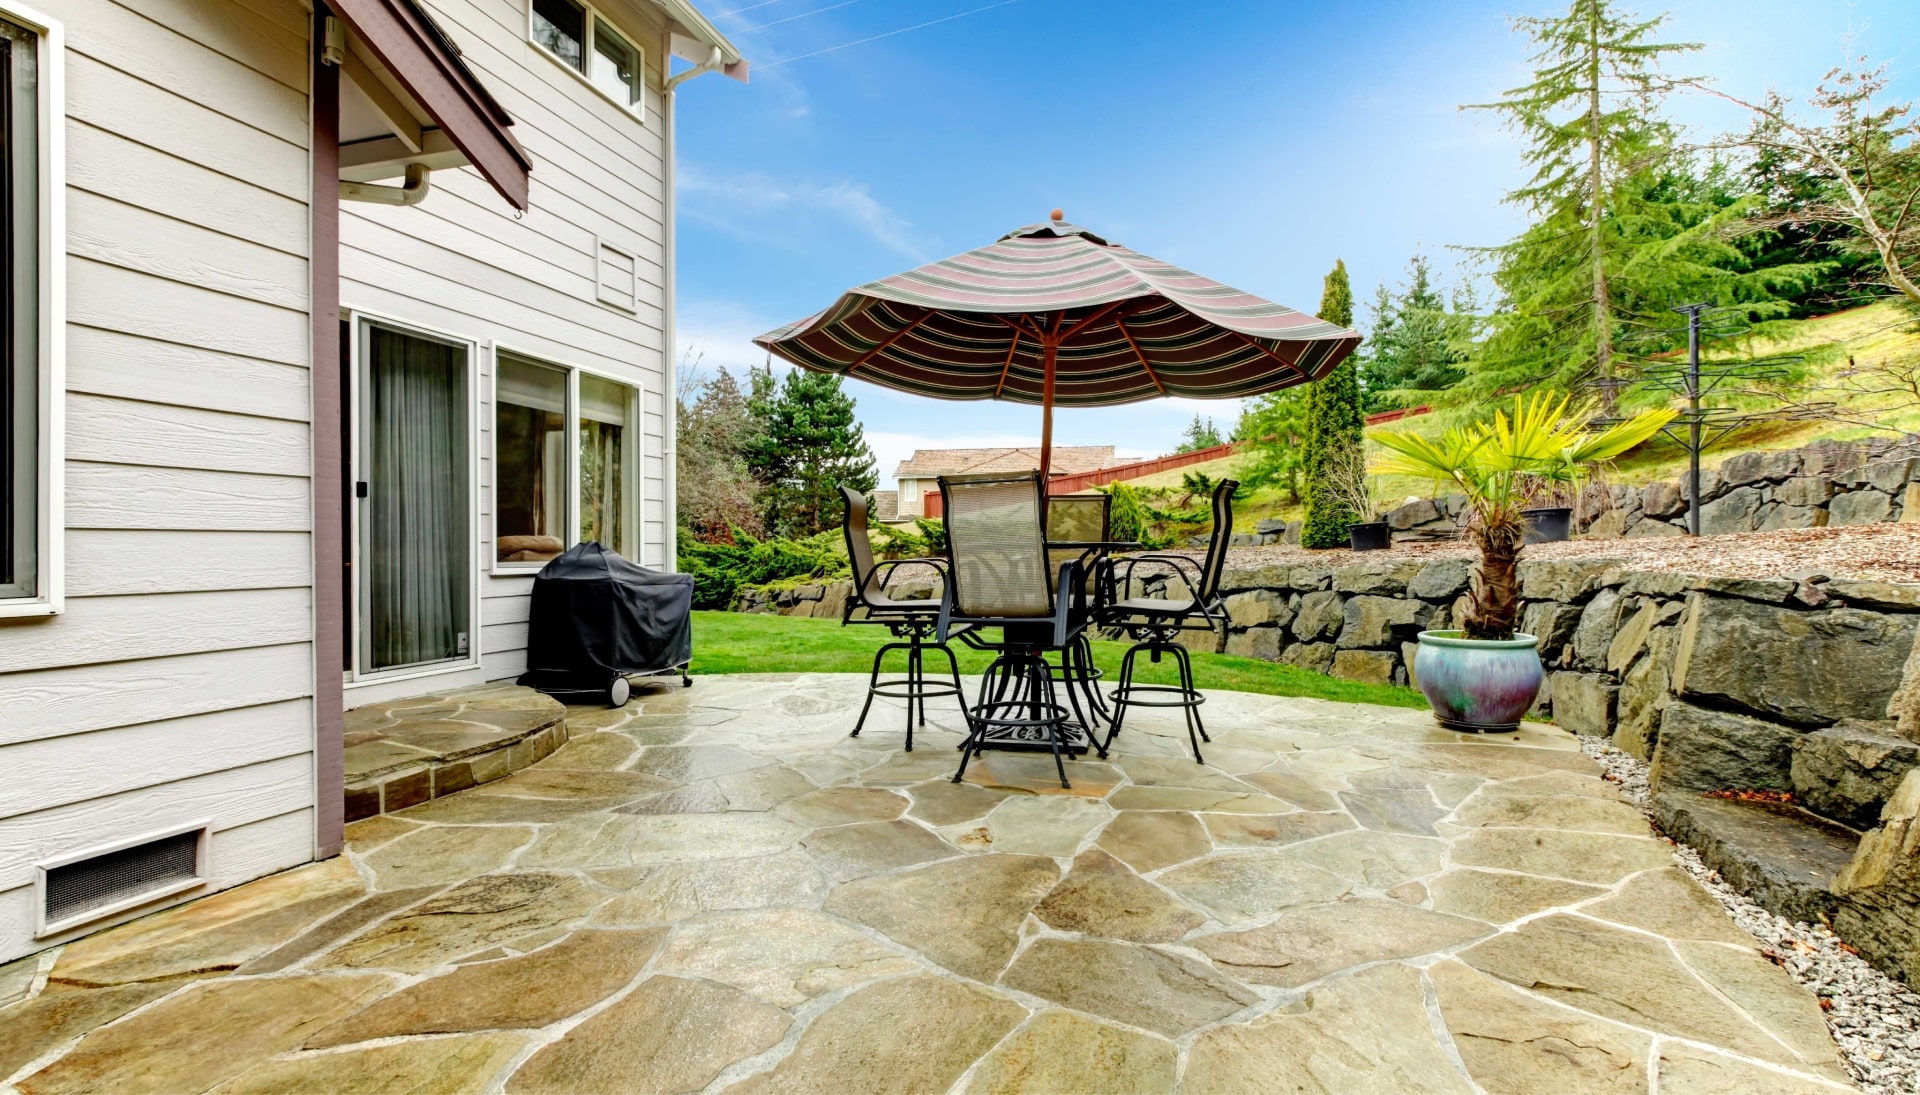 Beautifully Textured and Patterned Concrete Patios in Roseville, California area!